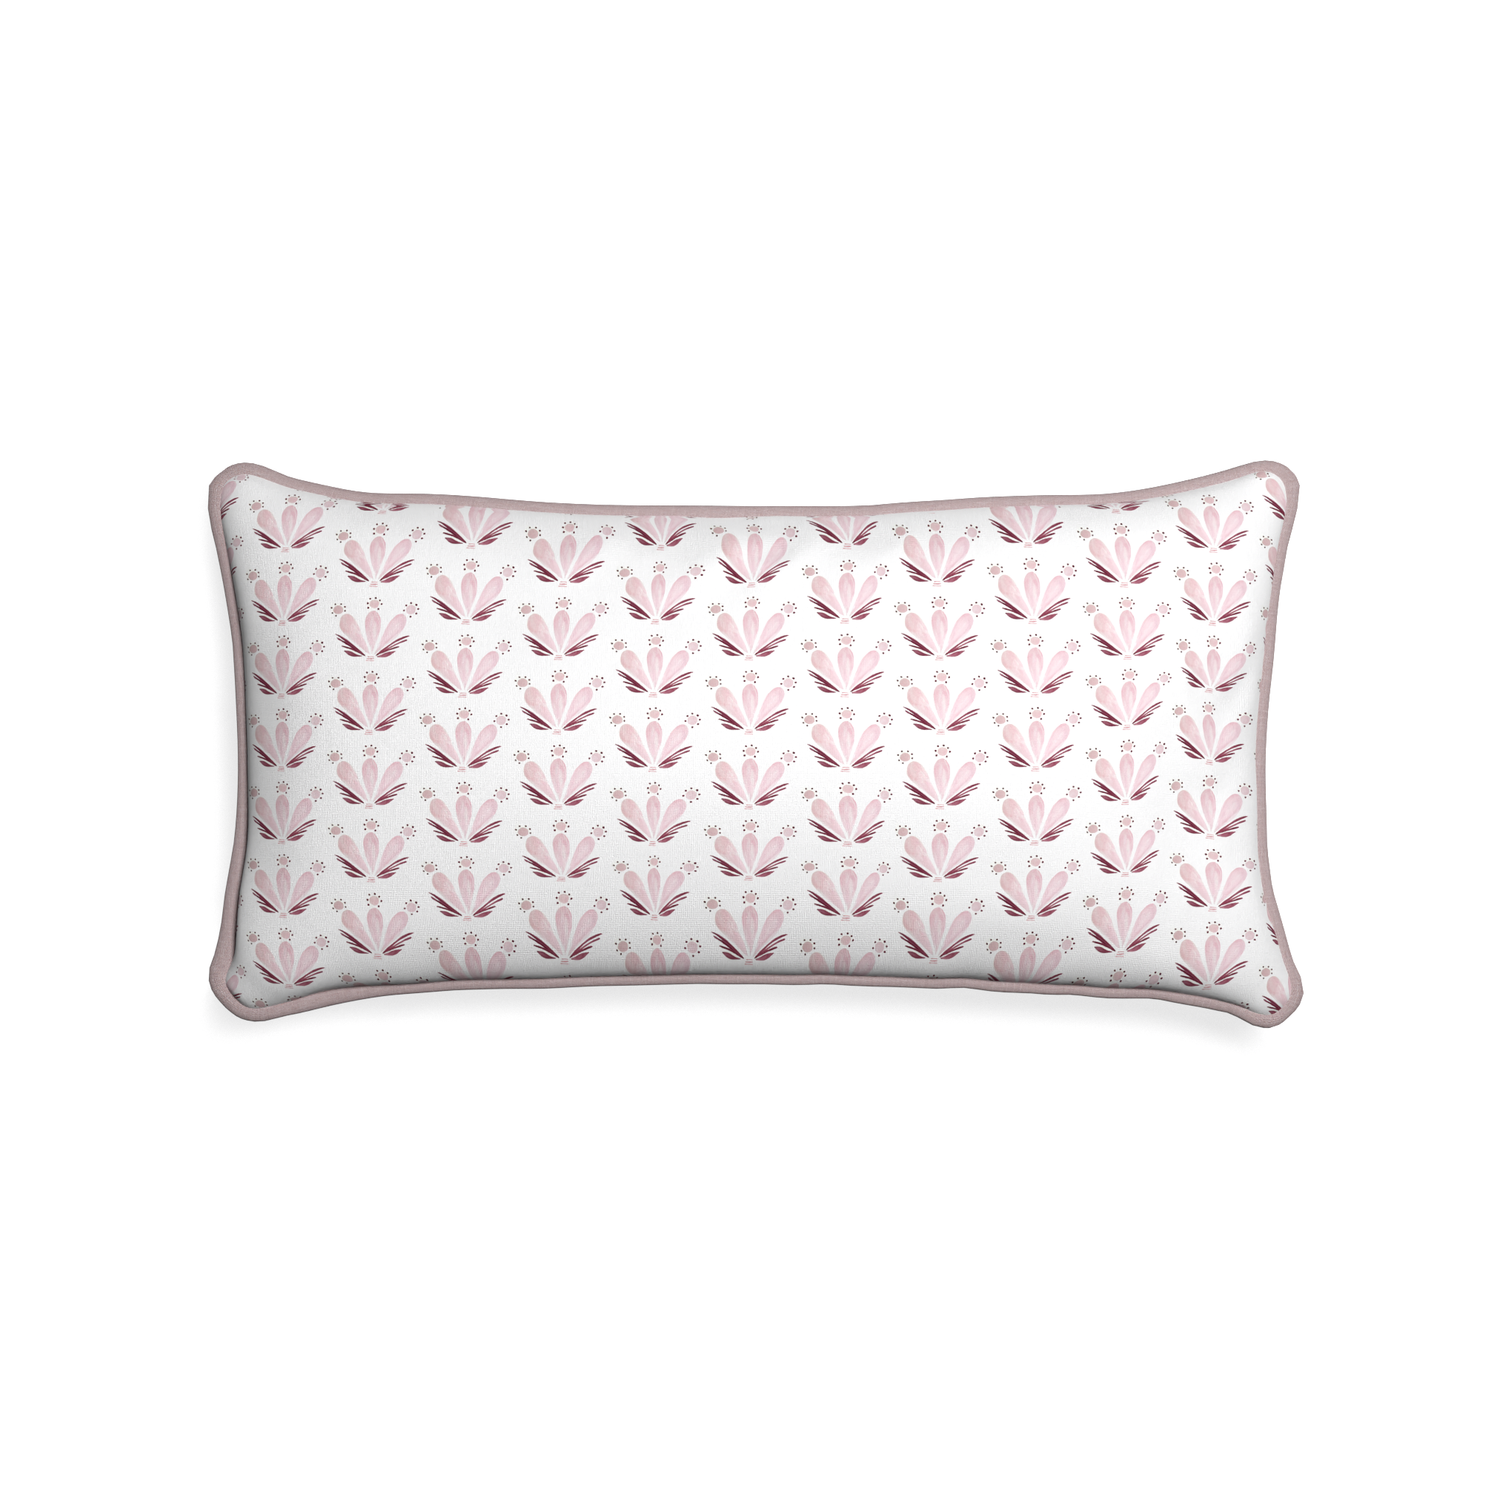 Midi-lumbar serena pink custom pink & burgundy drop repeat floralpillow with orchid piping on white background